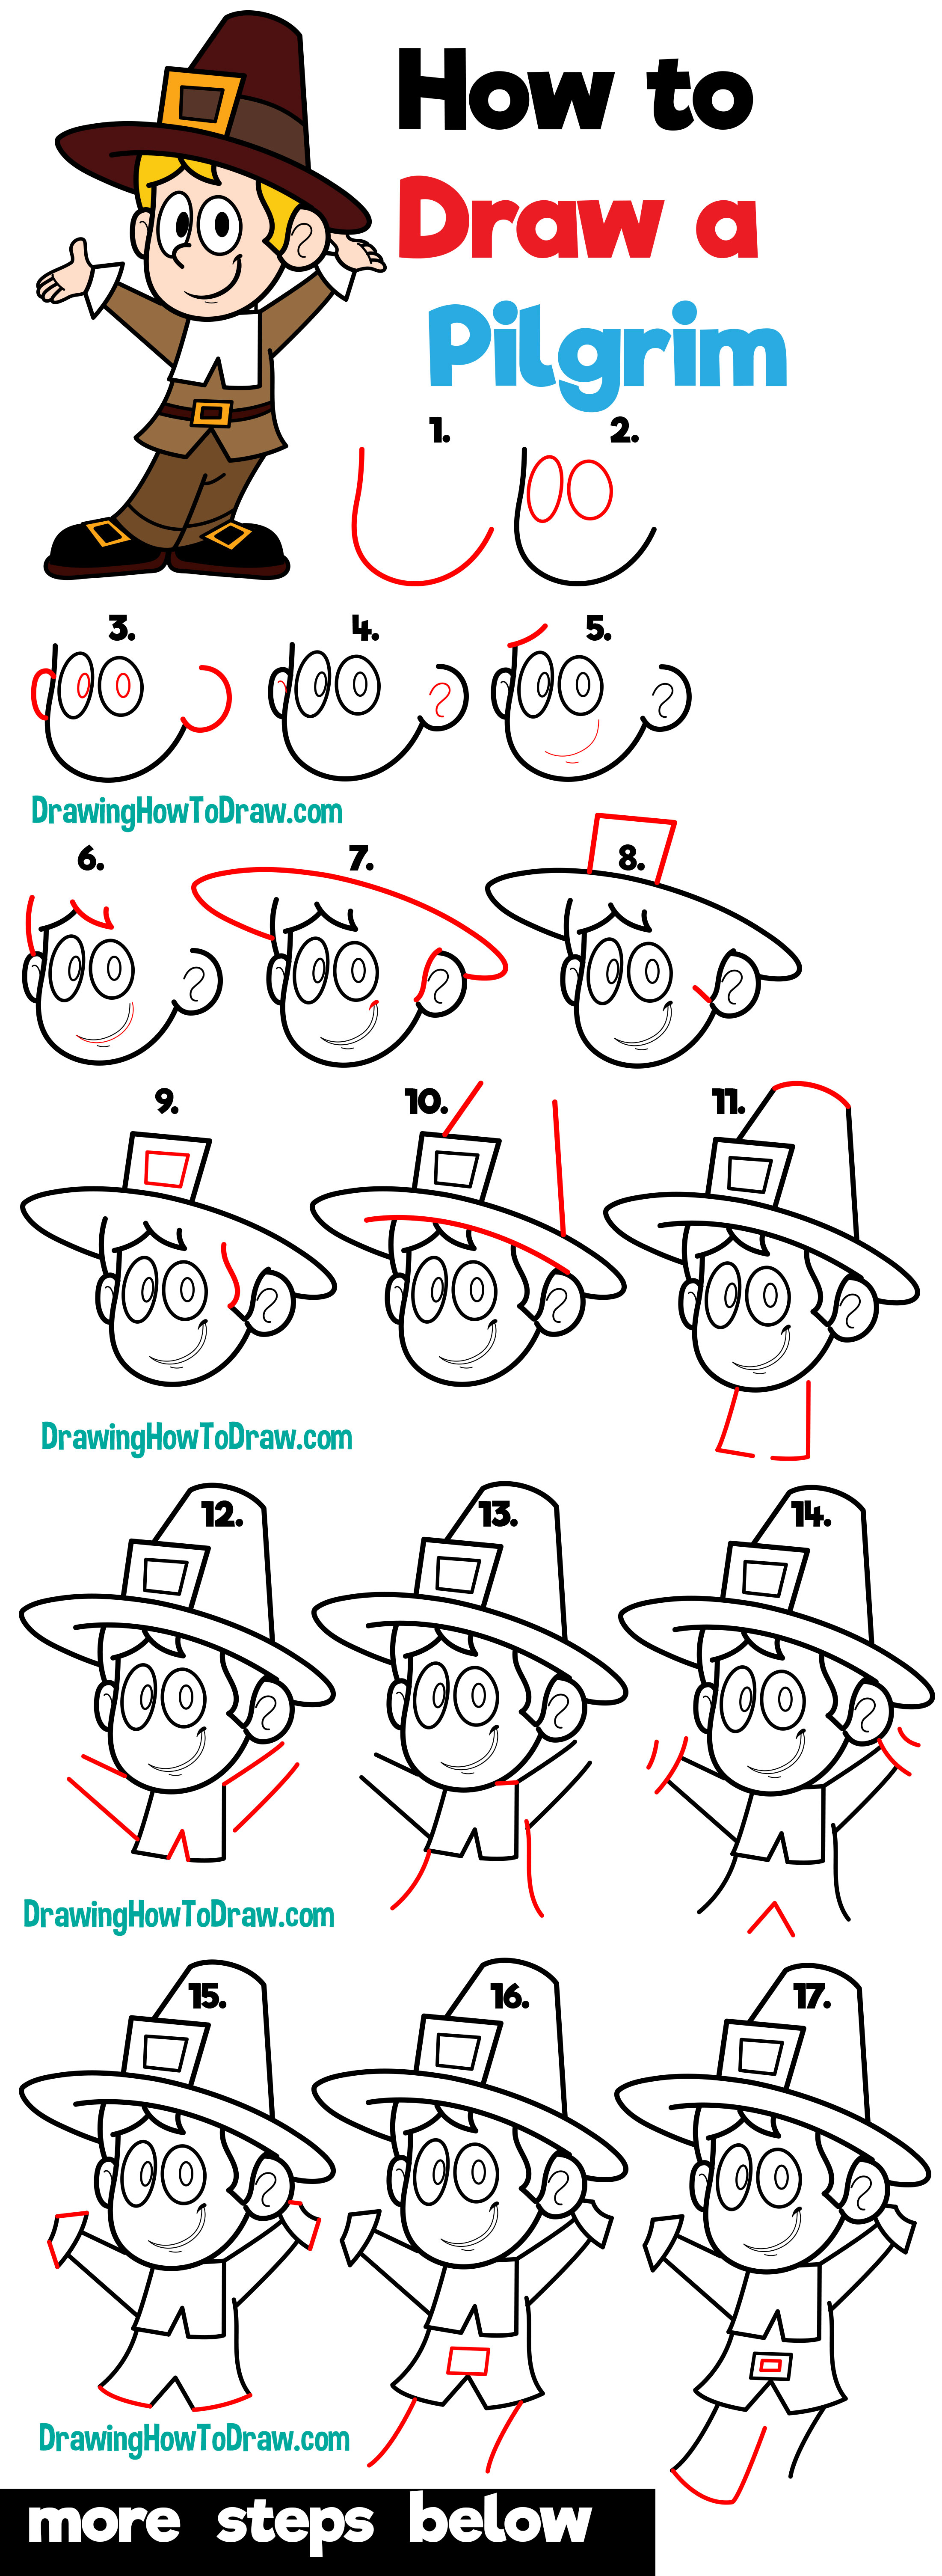 Learn How to Draw a Cartoon Pilgrim for Thanksgiving Easy Step by Step Drawing Tutorial for Beginners